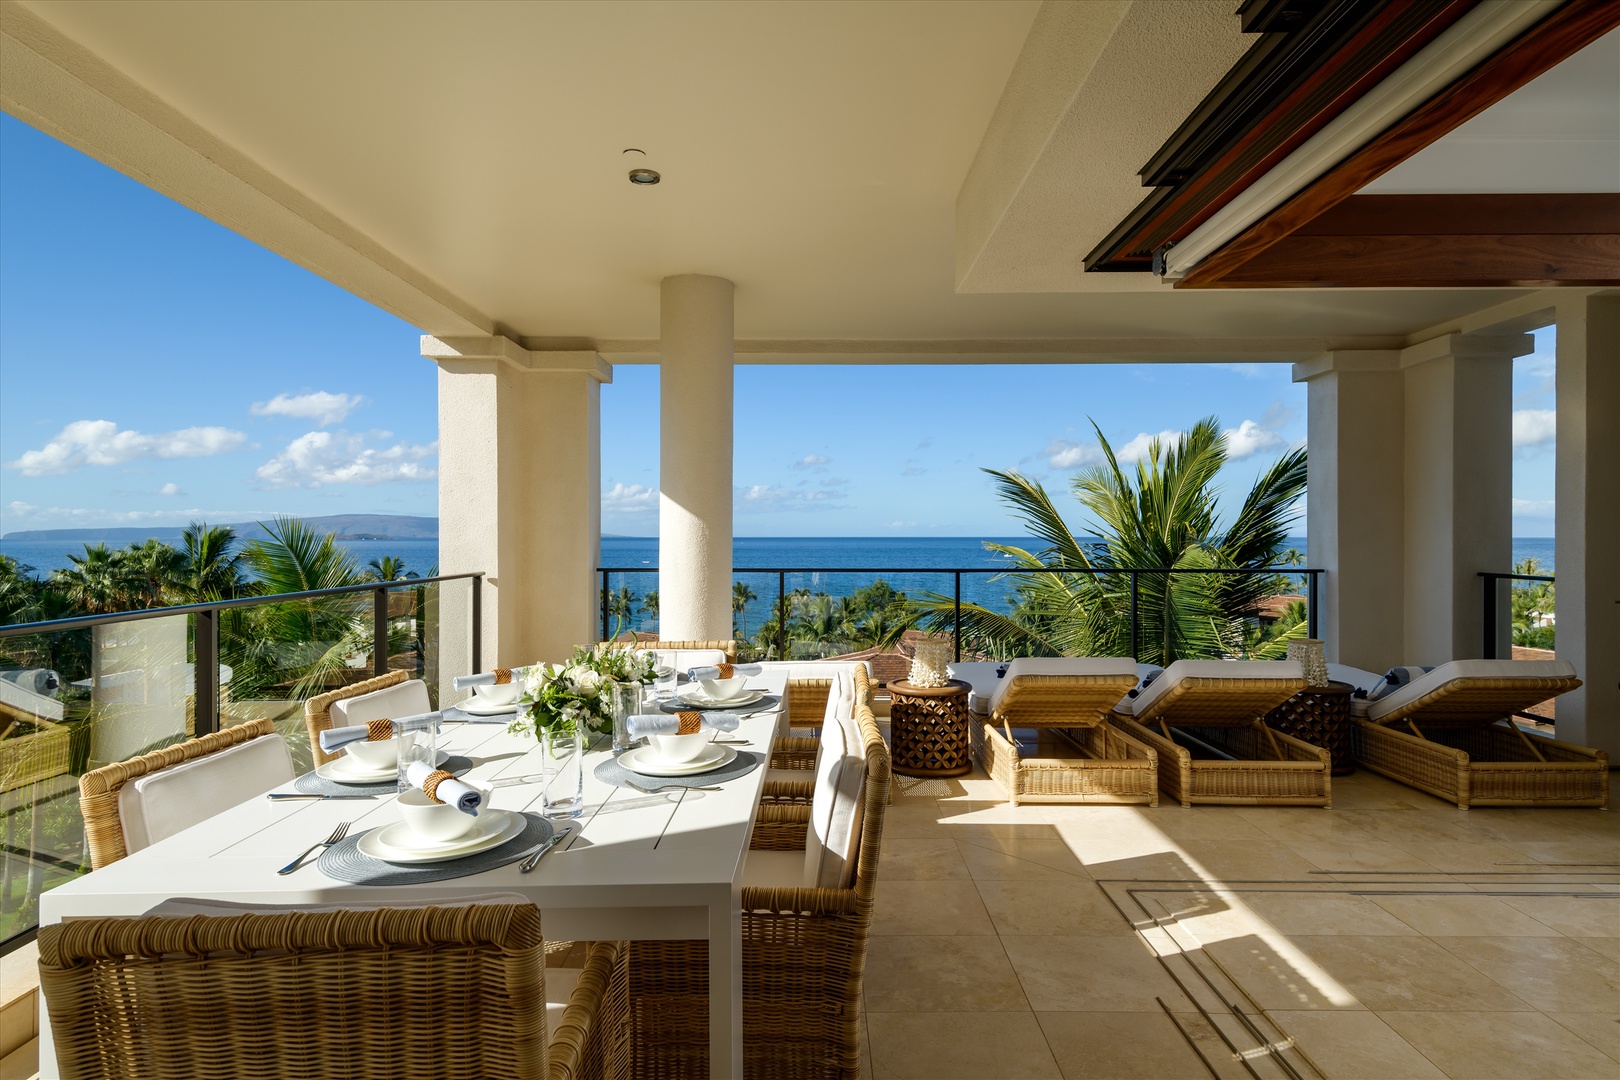 Wailea Vacation Rentals, Blue Ocean Suite H401 at Wailea Beach Villas* - Amazing Panoramic Ocean and Neighboring Island Views from Blue Ocean Suite H401 Covered Lanai and Outdoor Dining Area